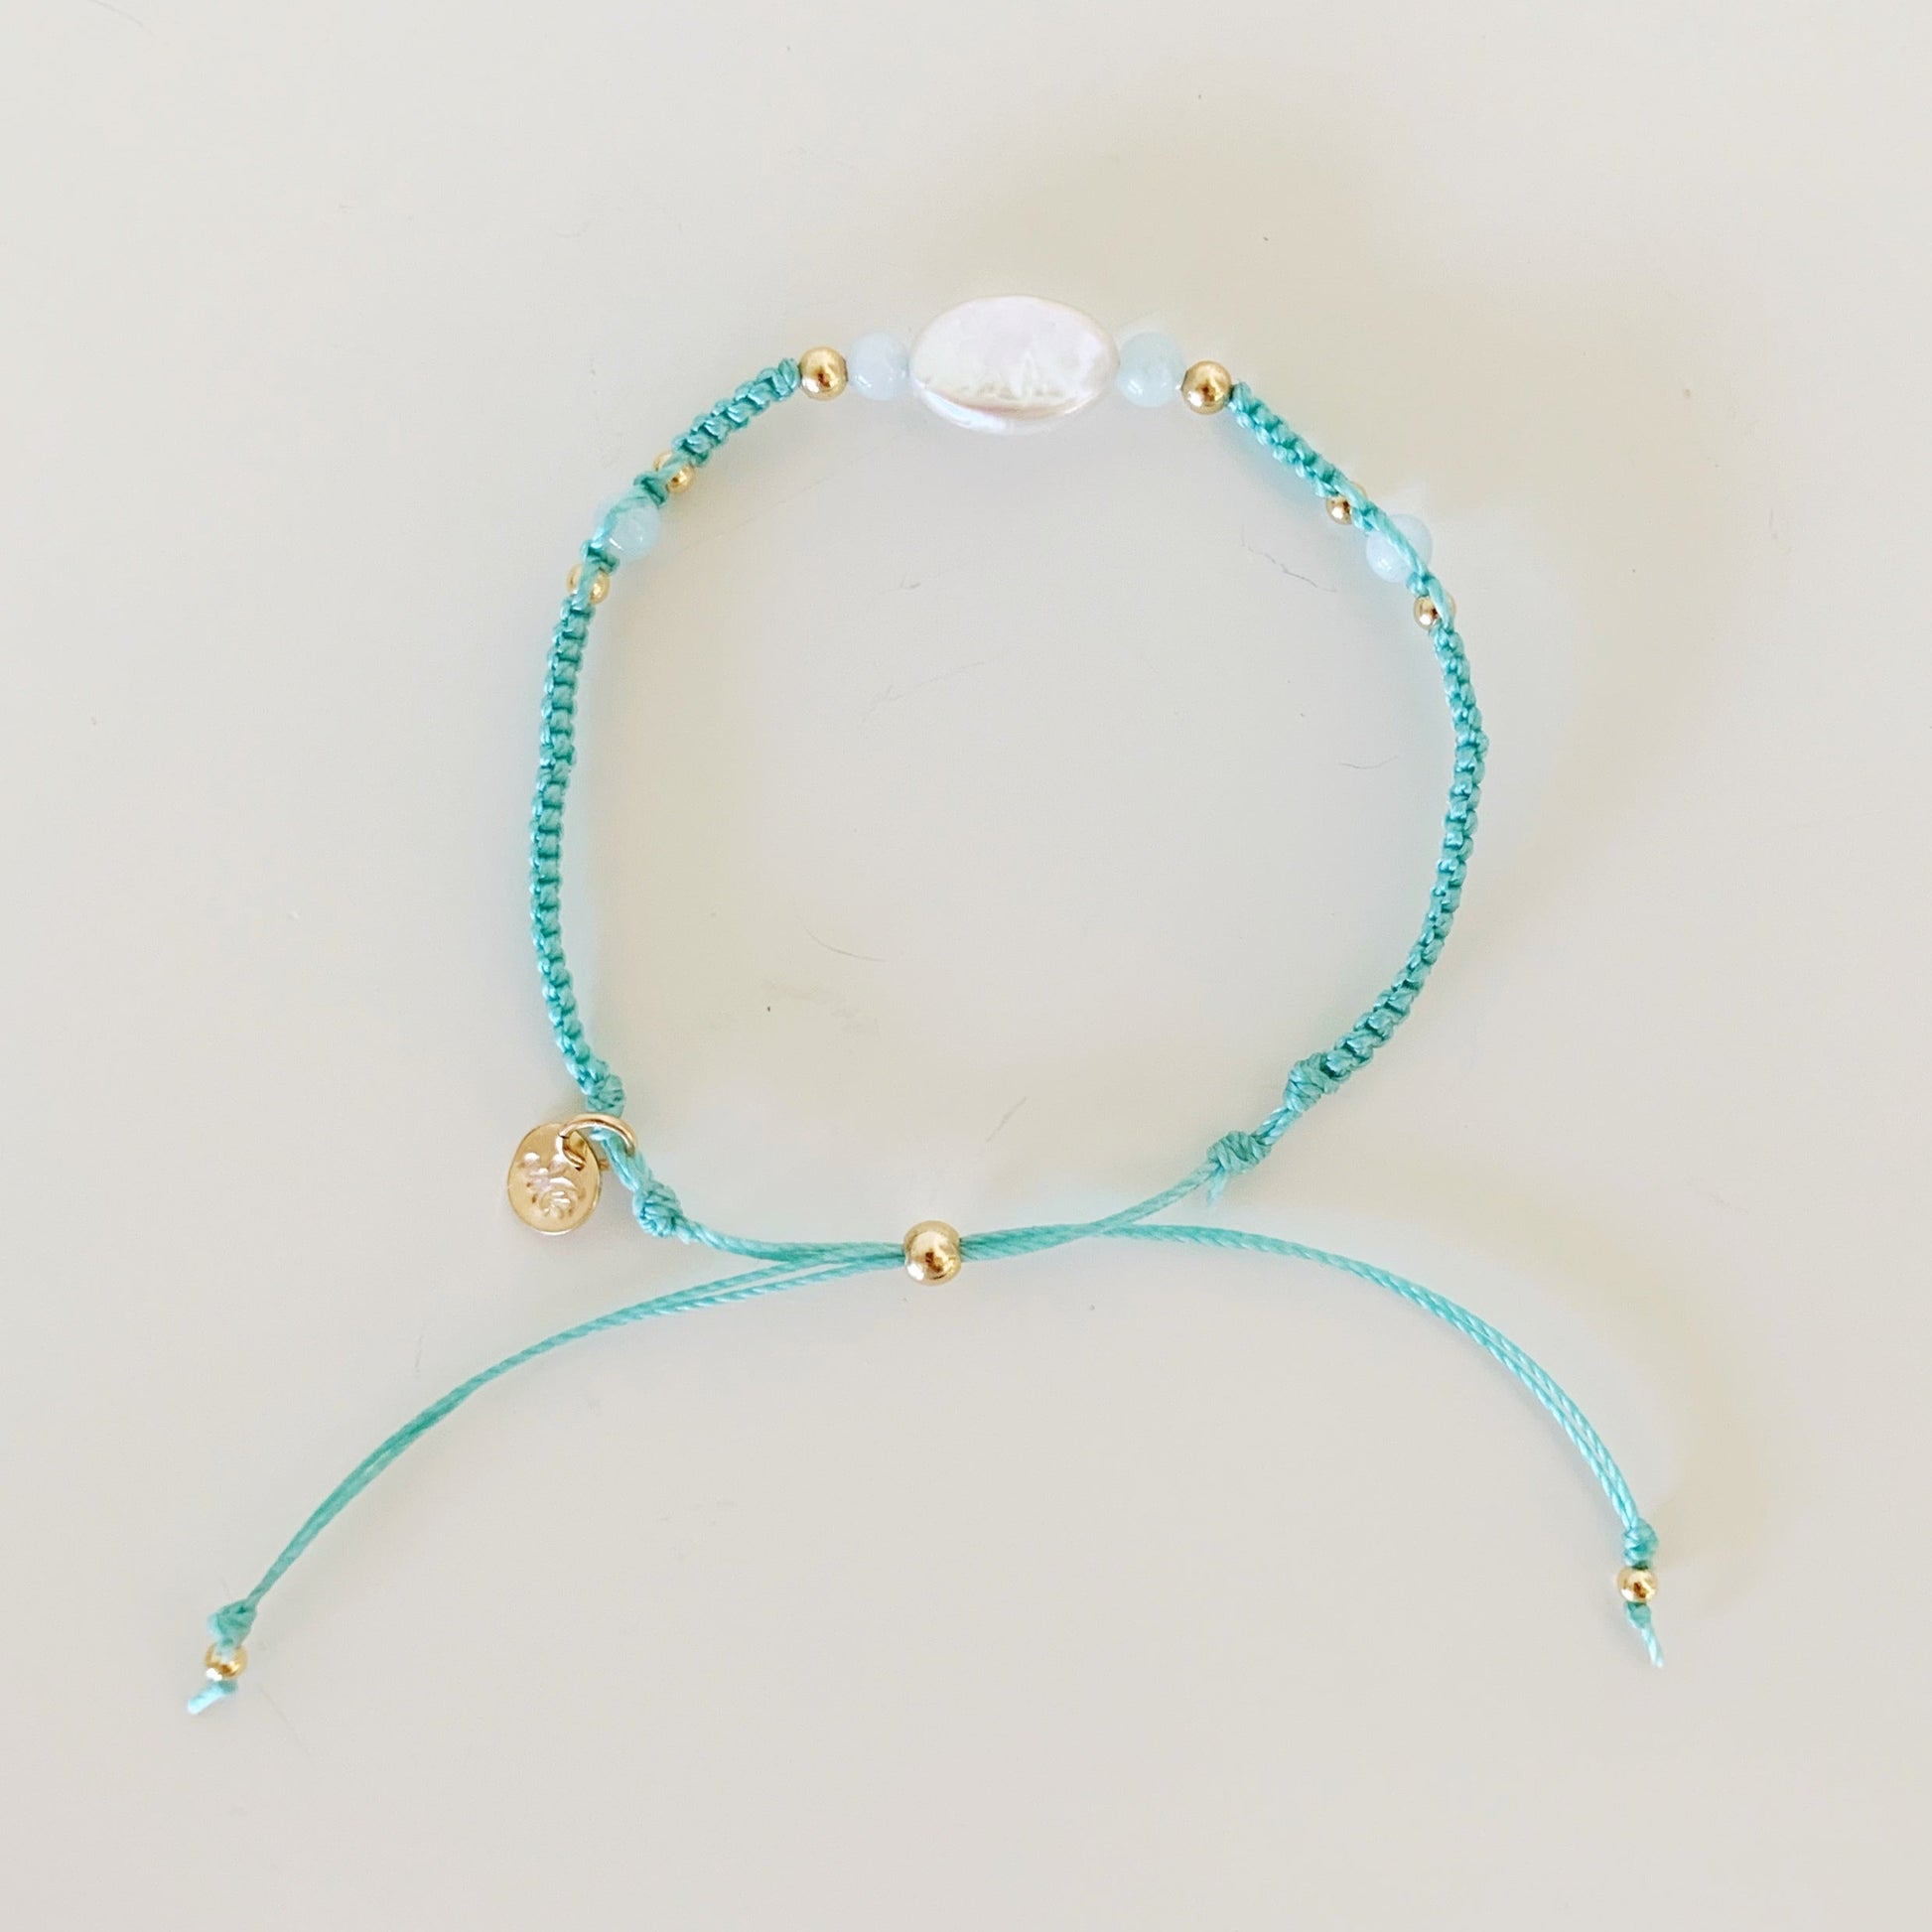 the certain urchin adjustable bracelet by mermaids and madeleines is created with an icy sage green color cord and knotted in a macrame style with a freshwater oval pearl at the center and 4mm aquamarine beads on either side. this bracelet is photographed in a top down full view on a white surface